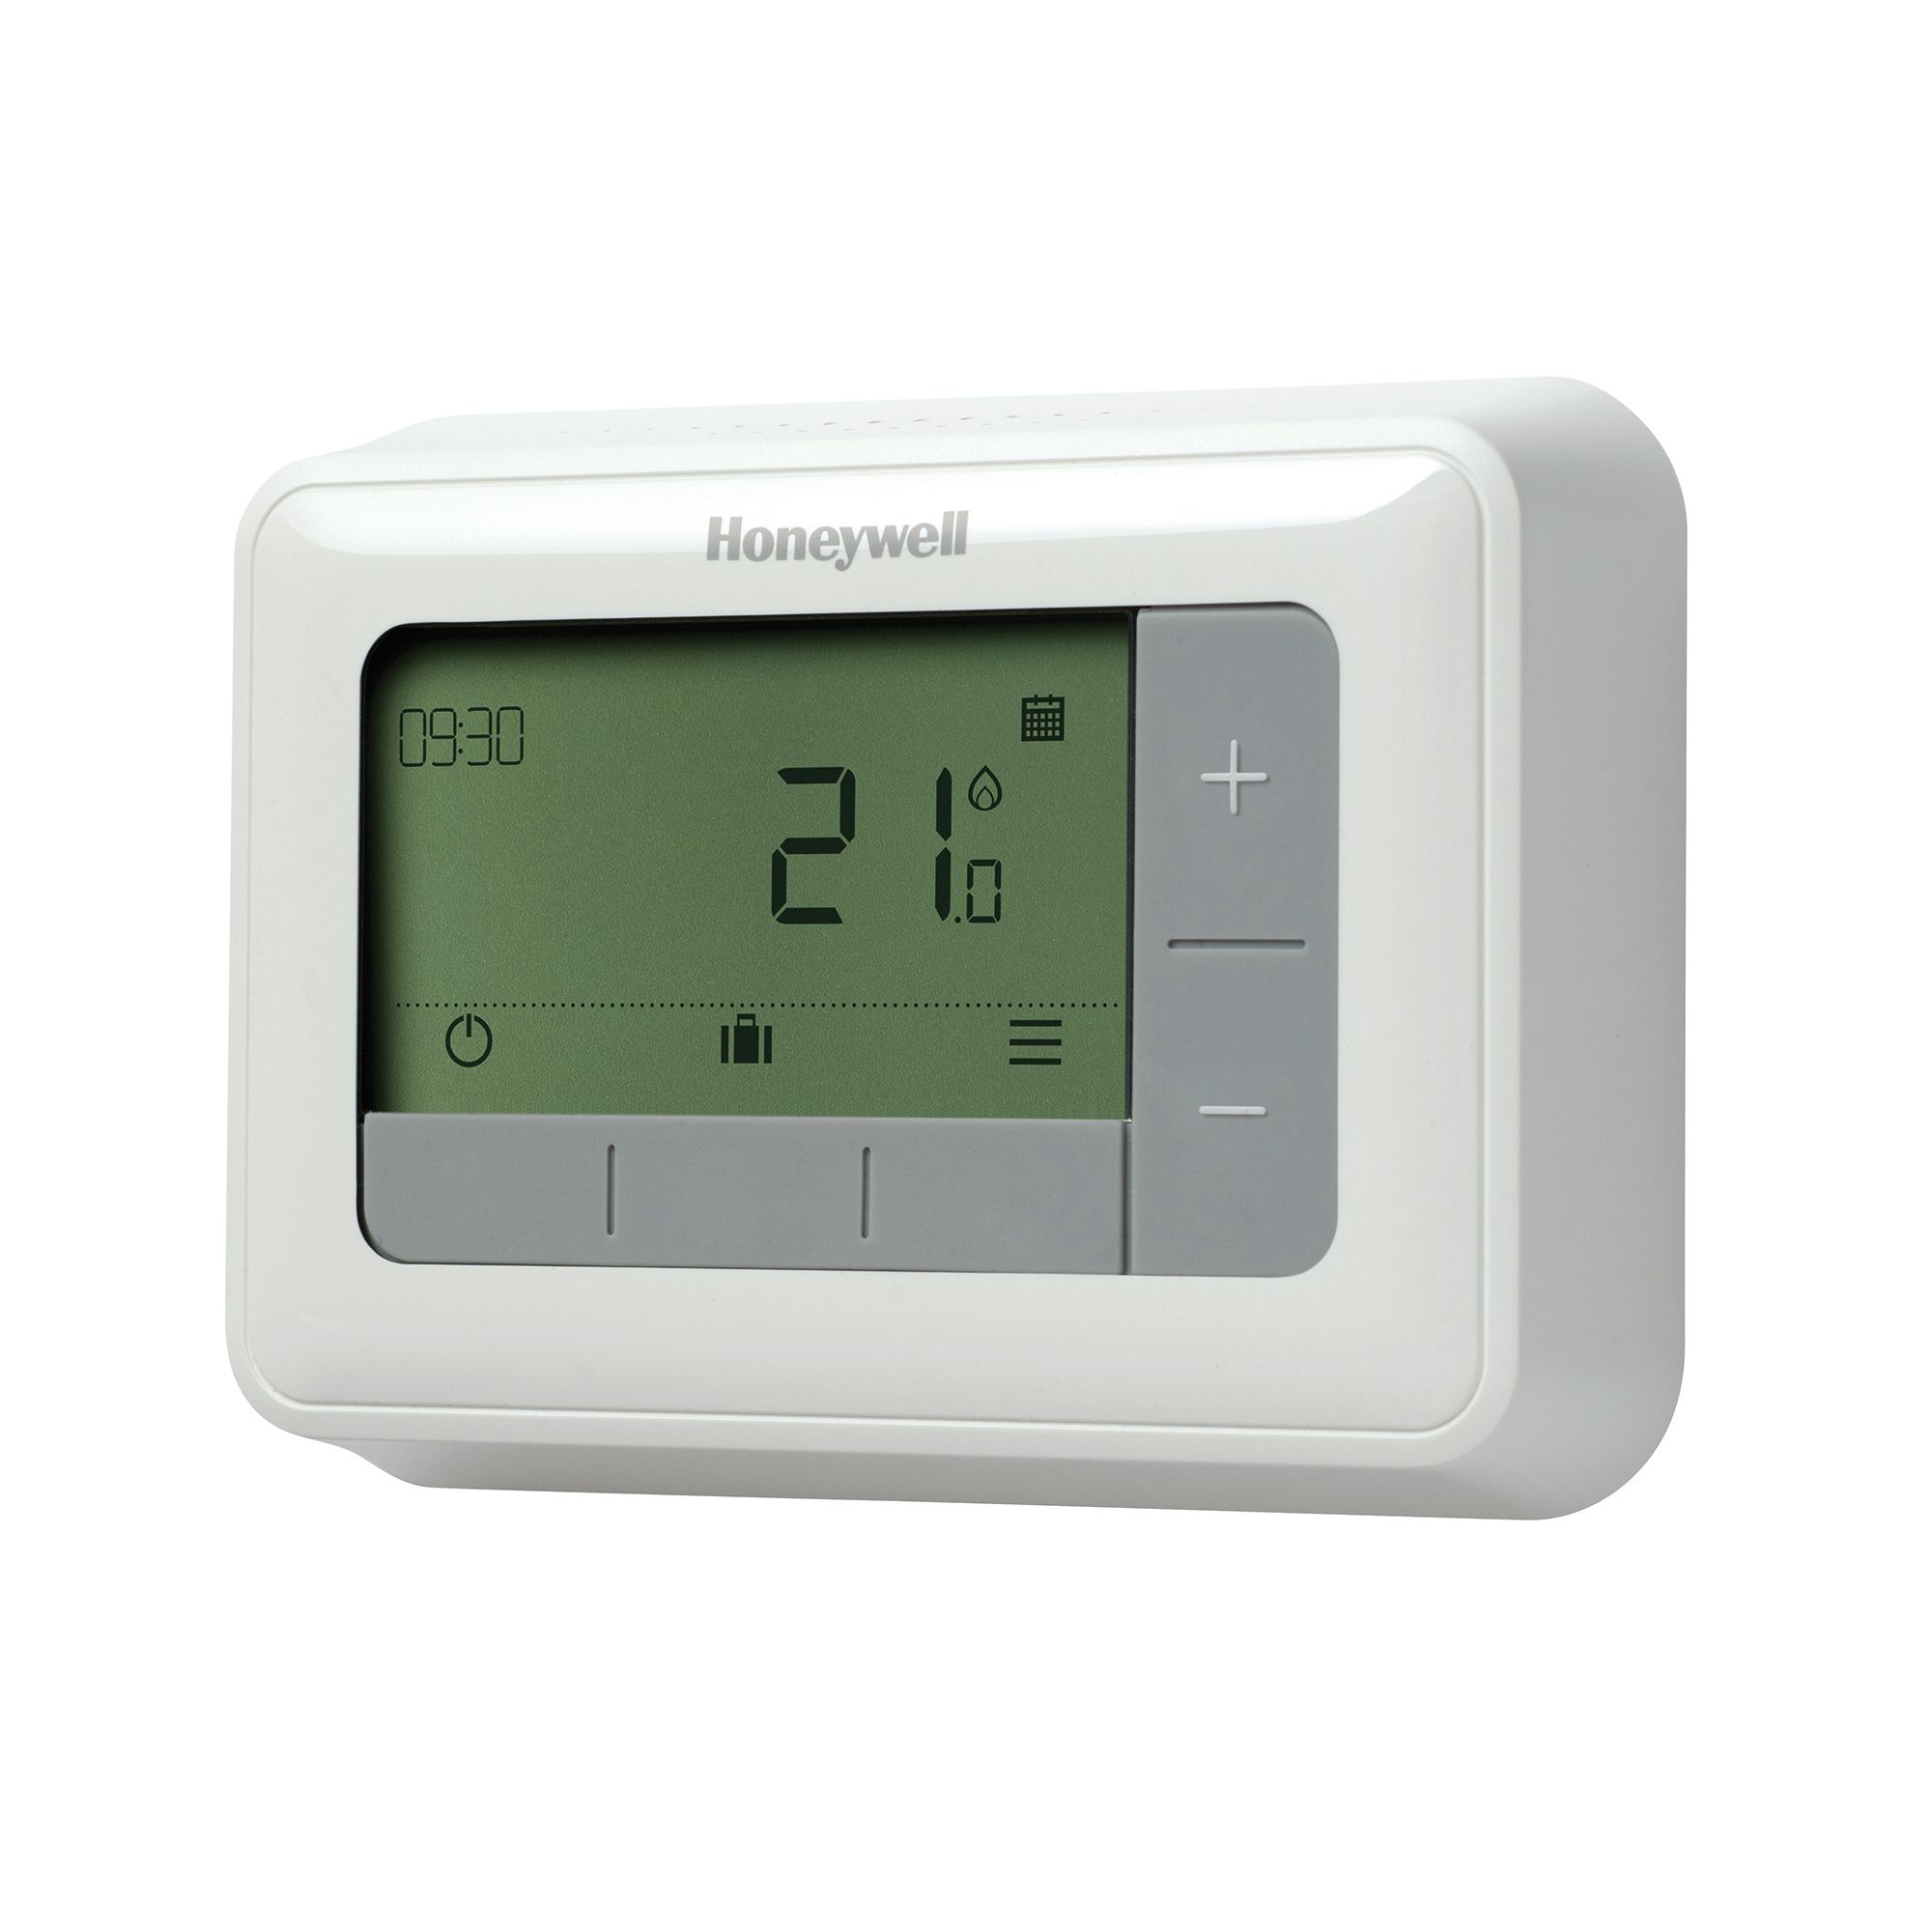 https://media.diy.com/is/image/Kingfisher/honeywell-t4-battery-powered-wired-room-thermostat~5025121381215_01c?$MOB_PREV$&$width=618&$height=618